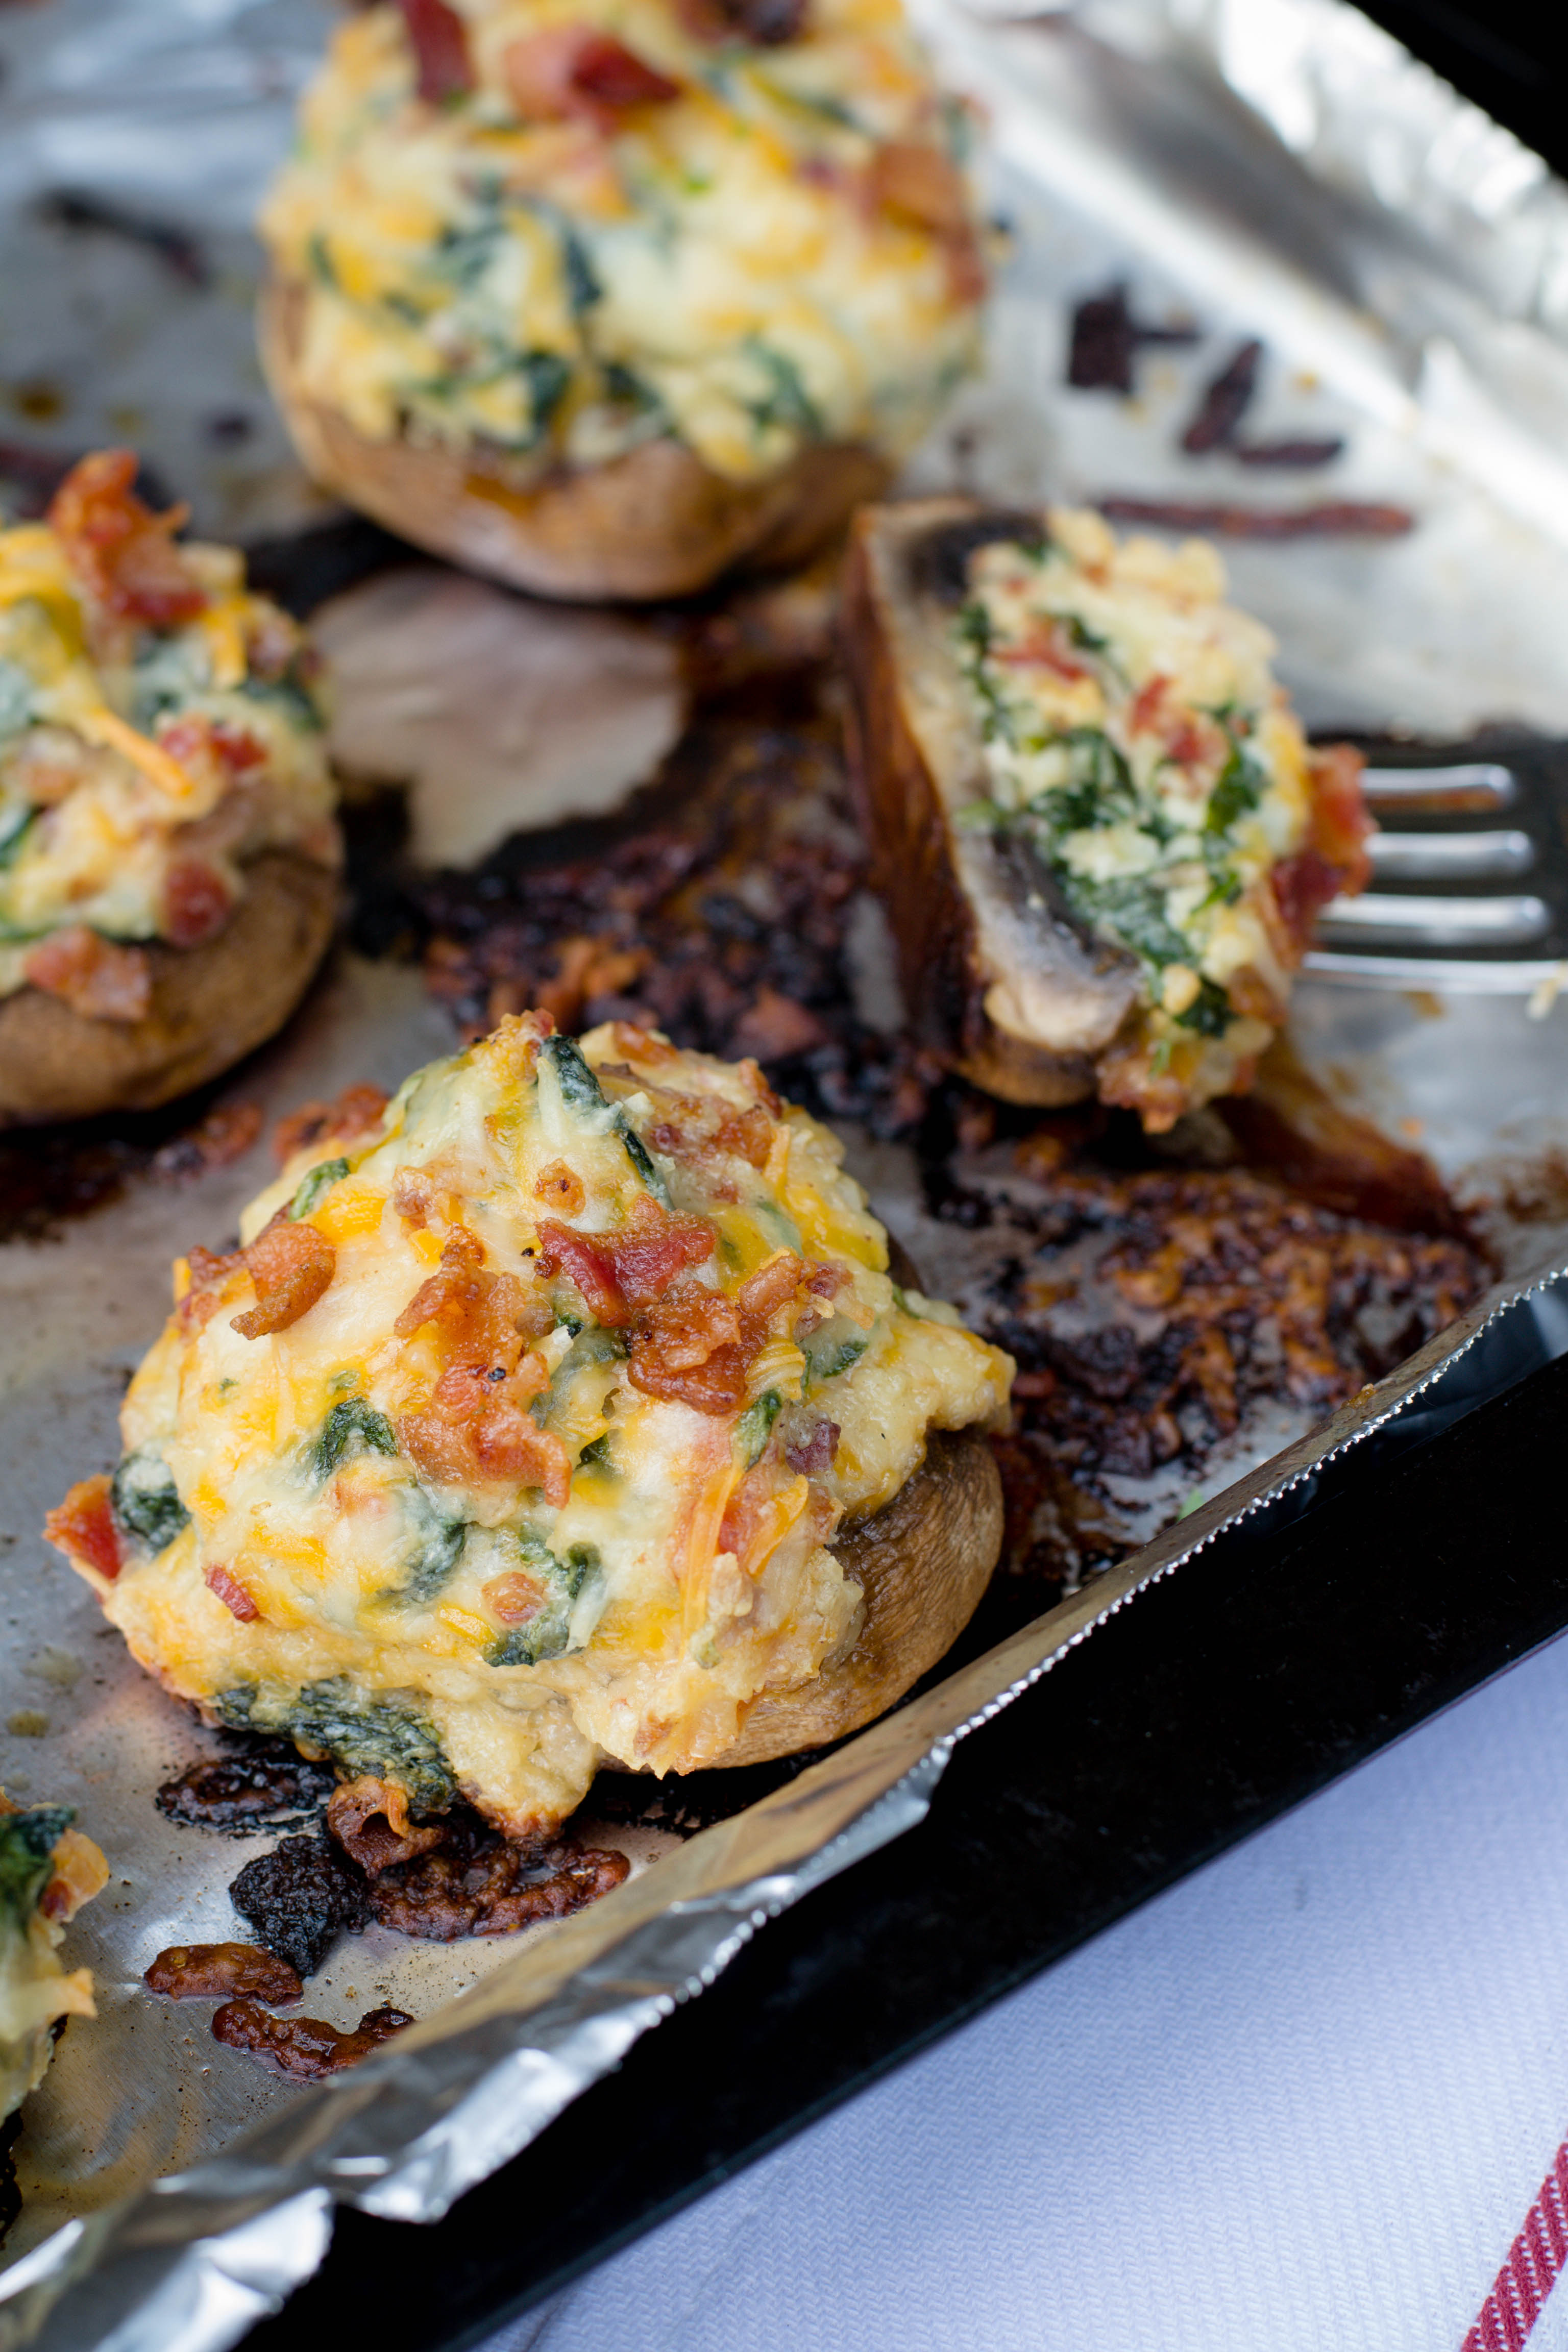 Grilled Stuffed Mushrooms - What the Forks for Dinner?